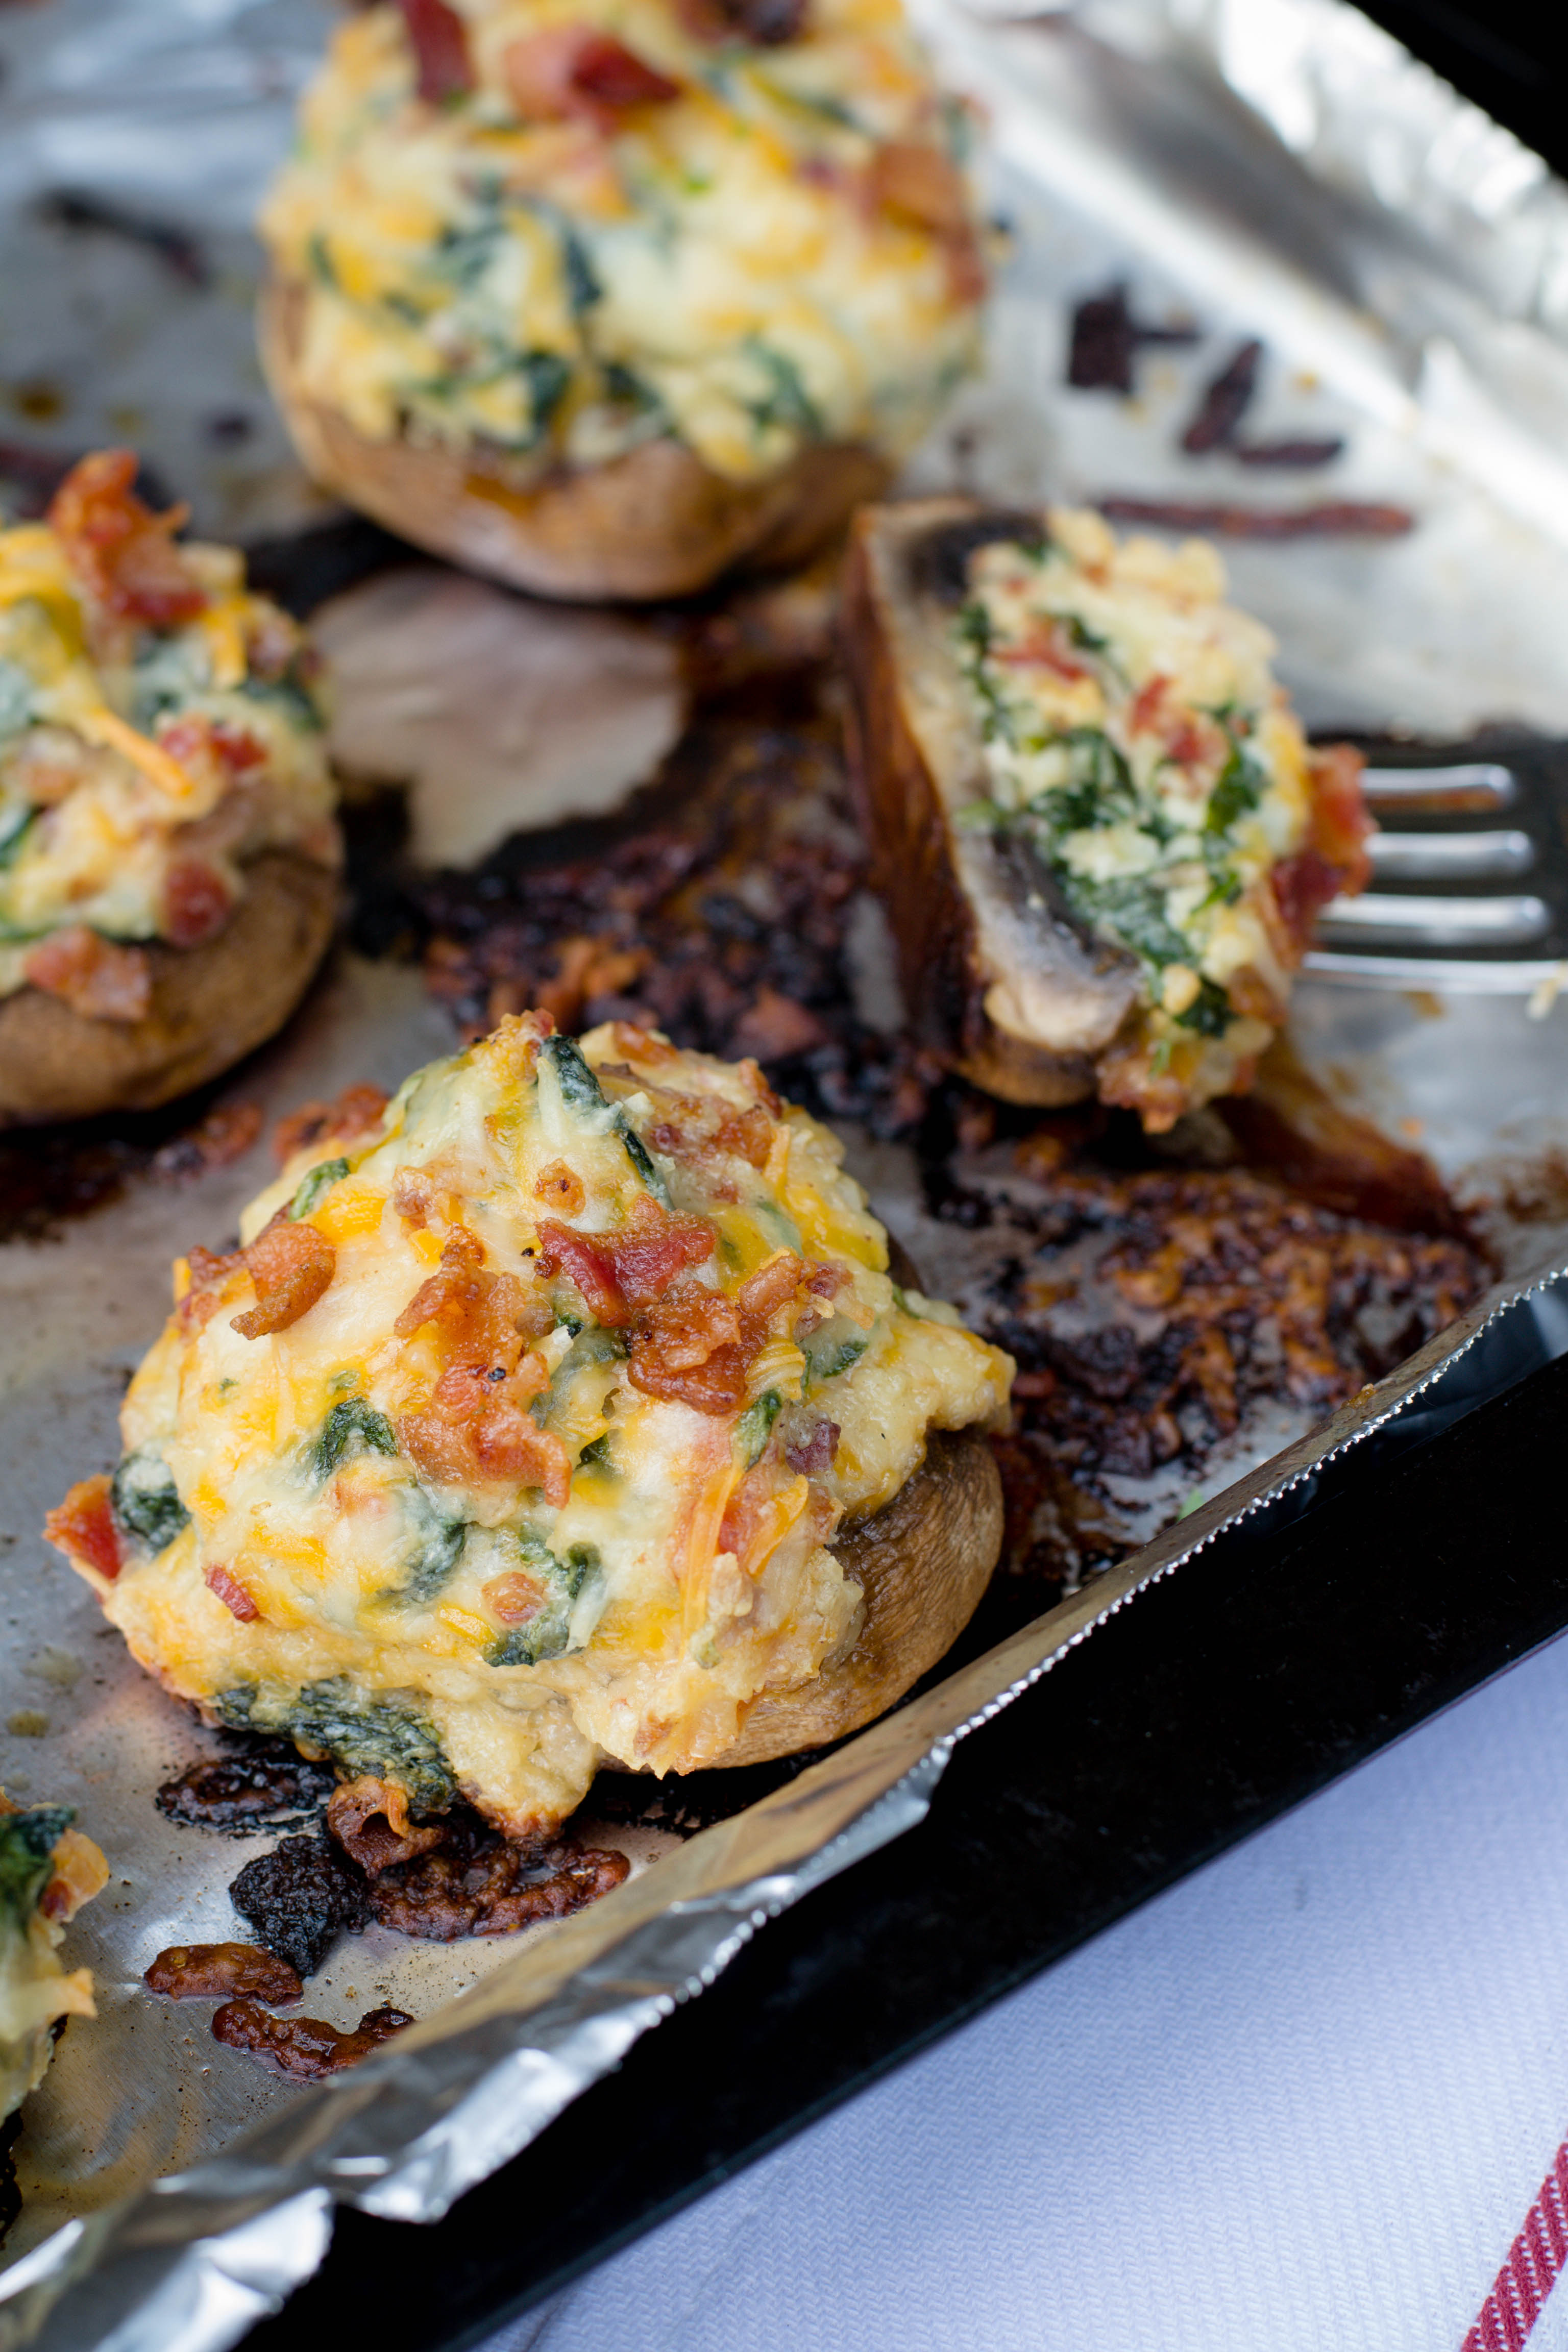 Grilled Stuffed Mushrooms - What the Forks for Dinner?